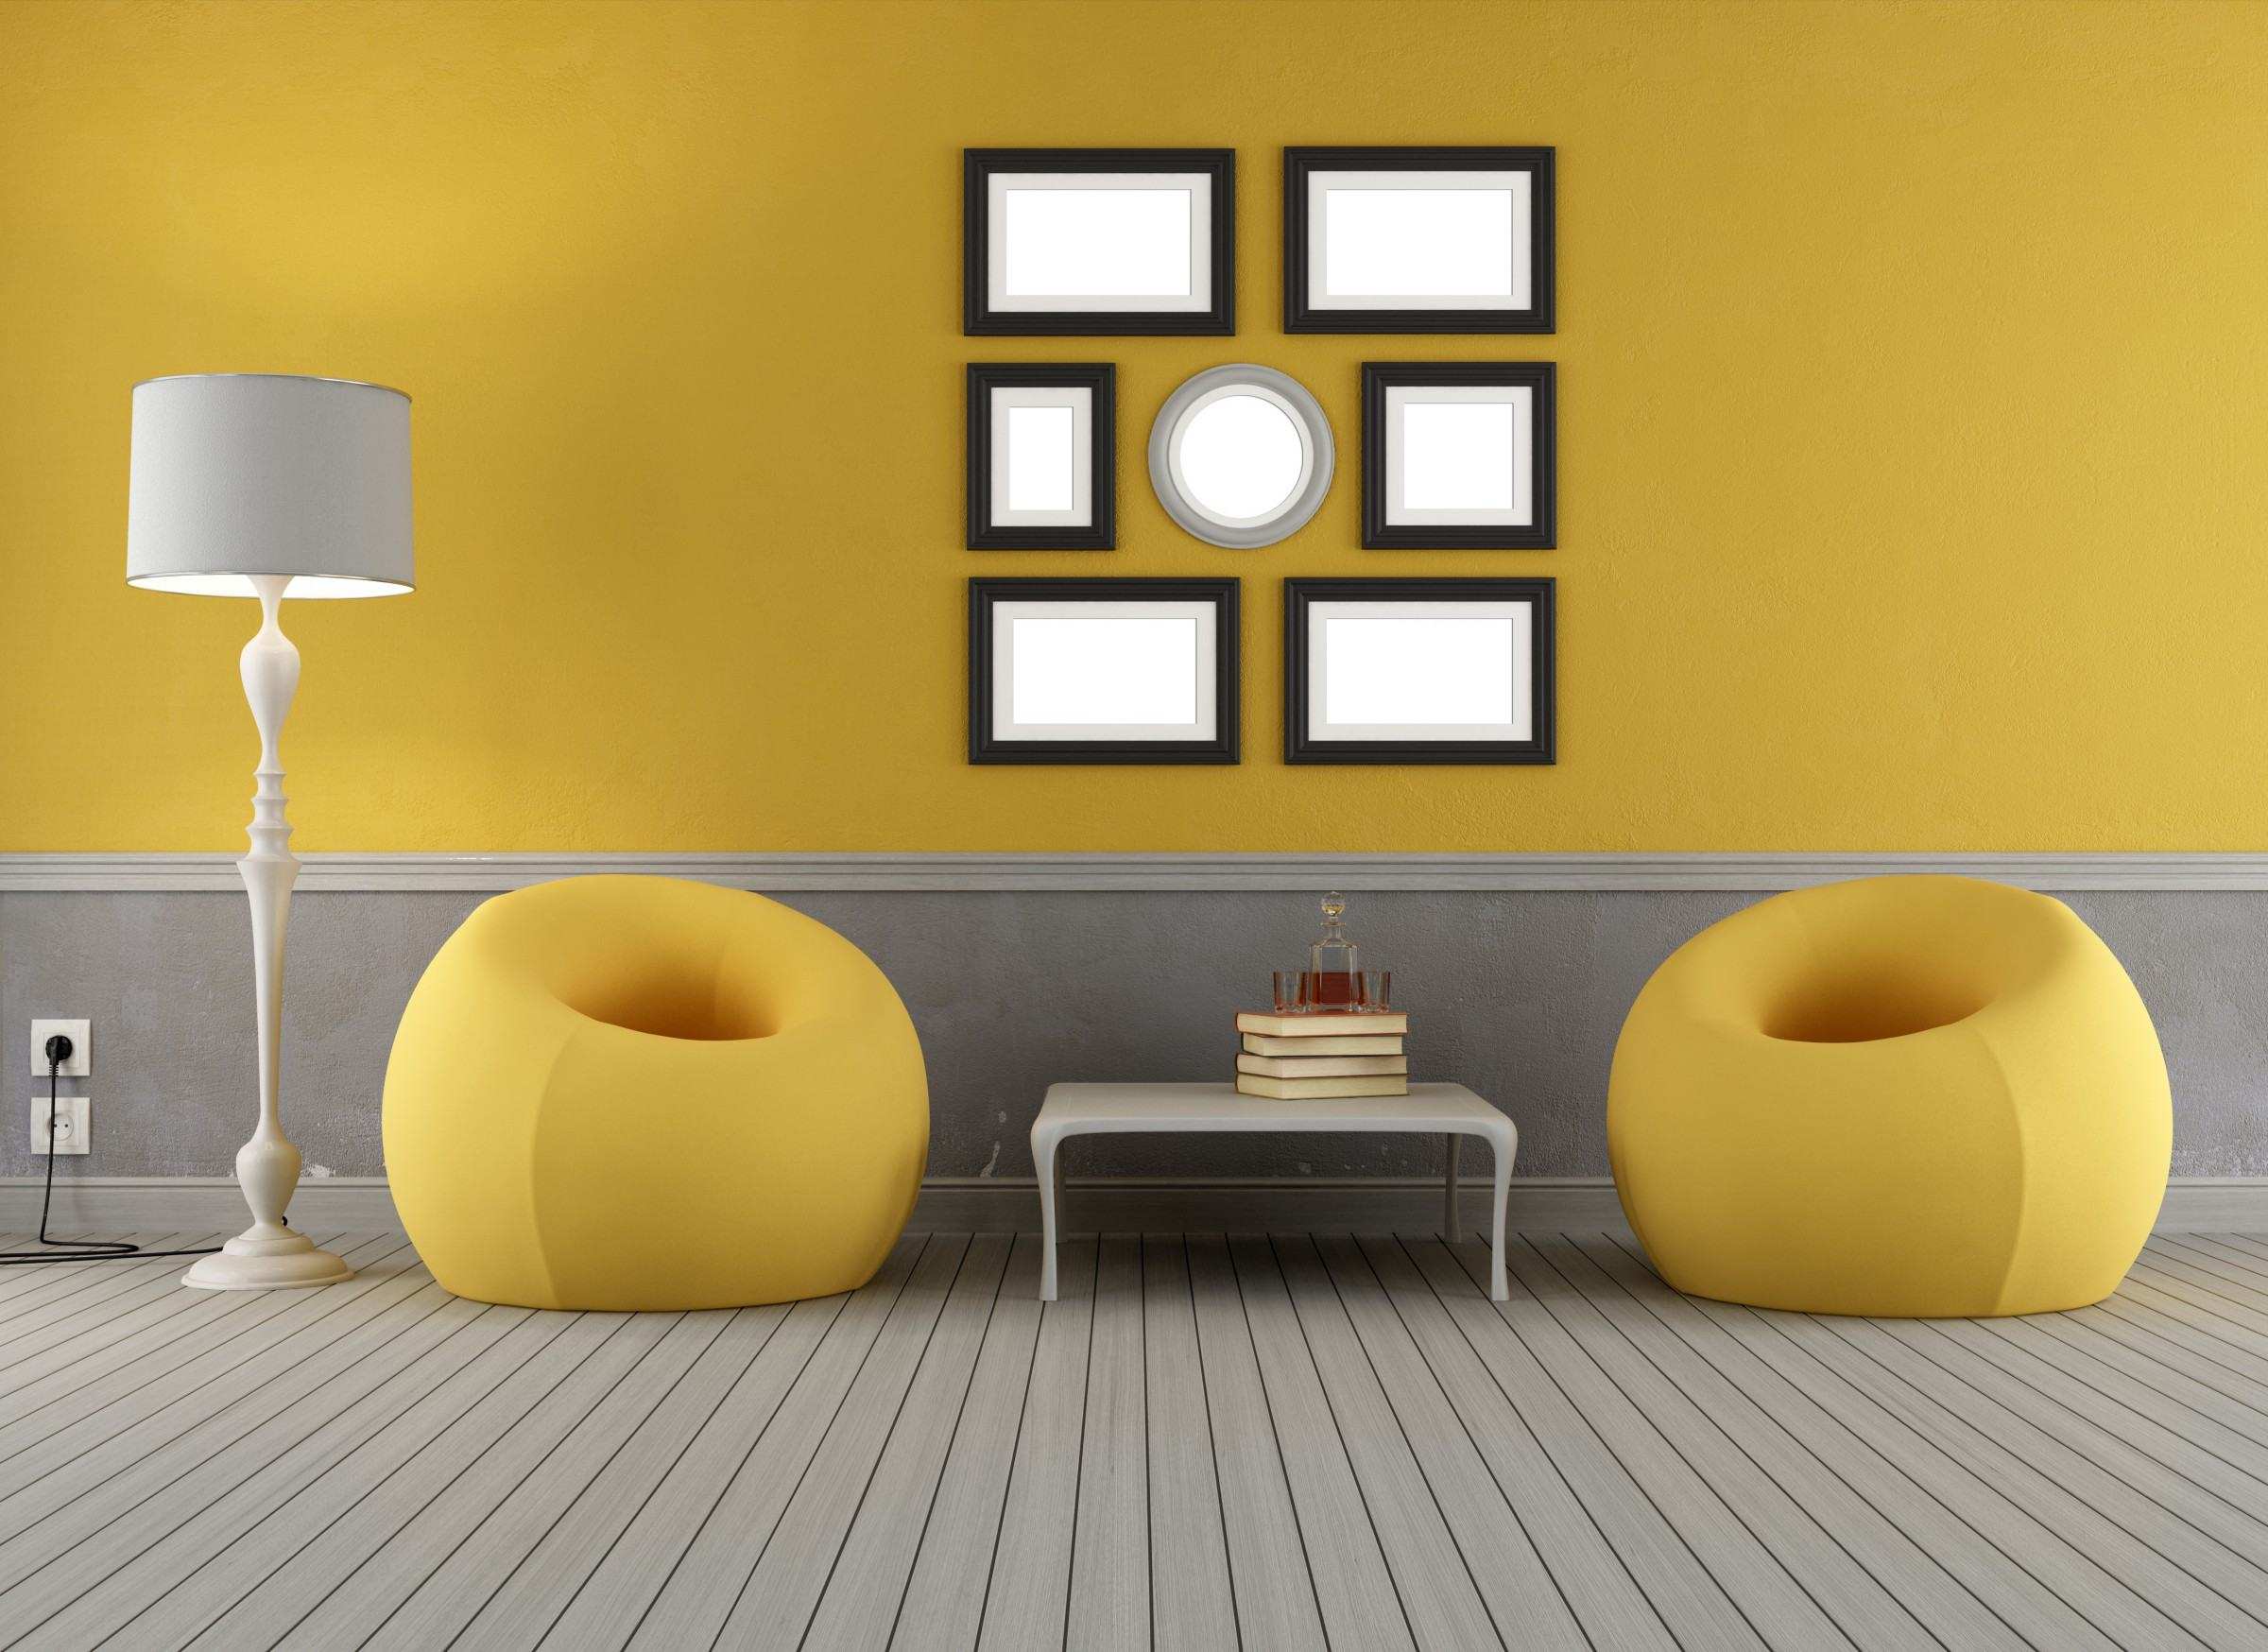 An example of using bright yellow in the decor of an apartment